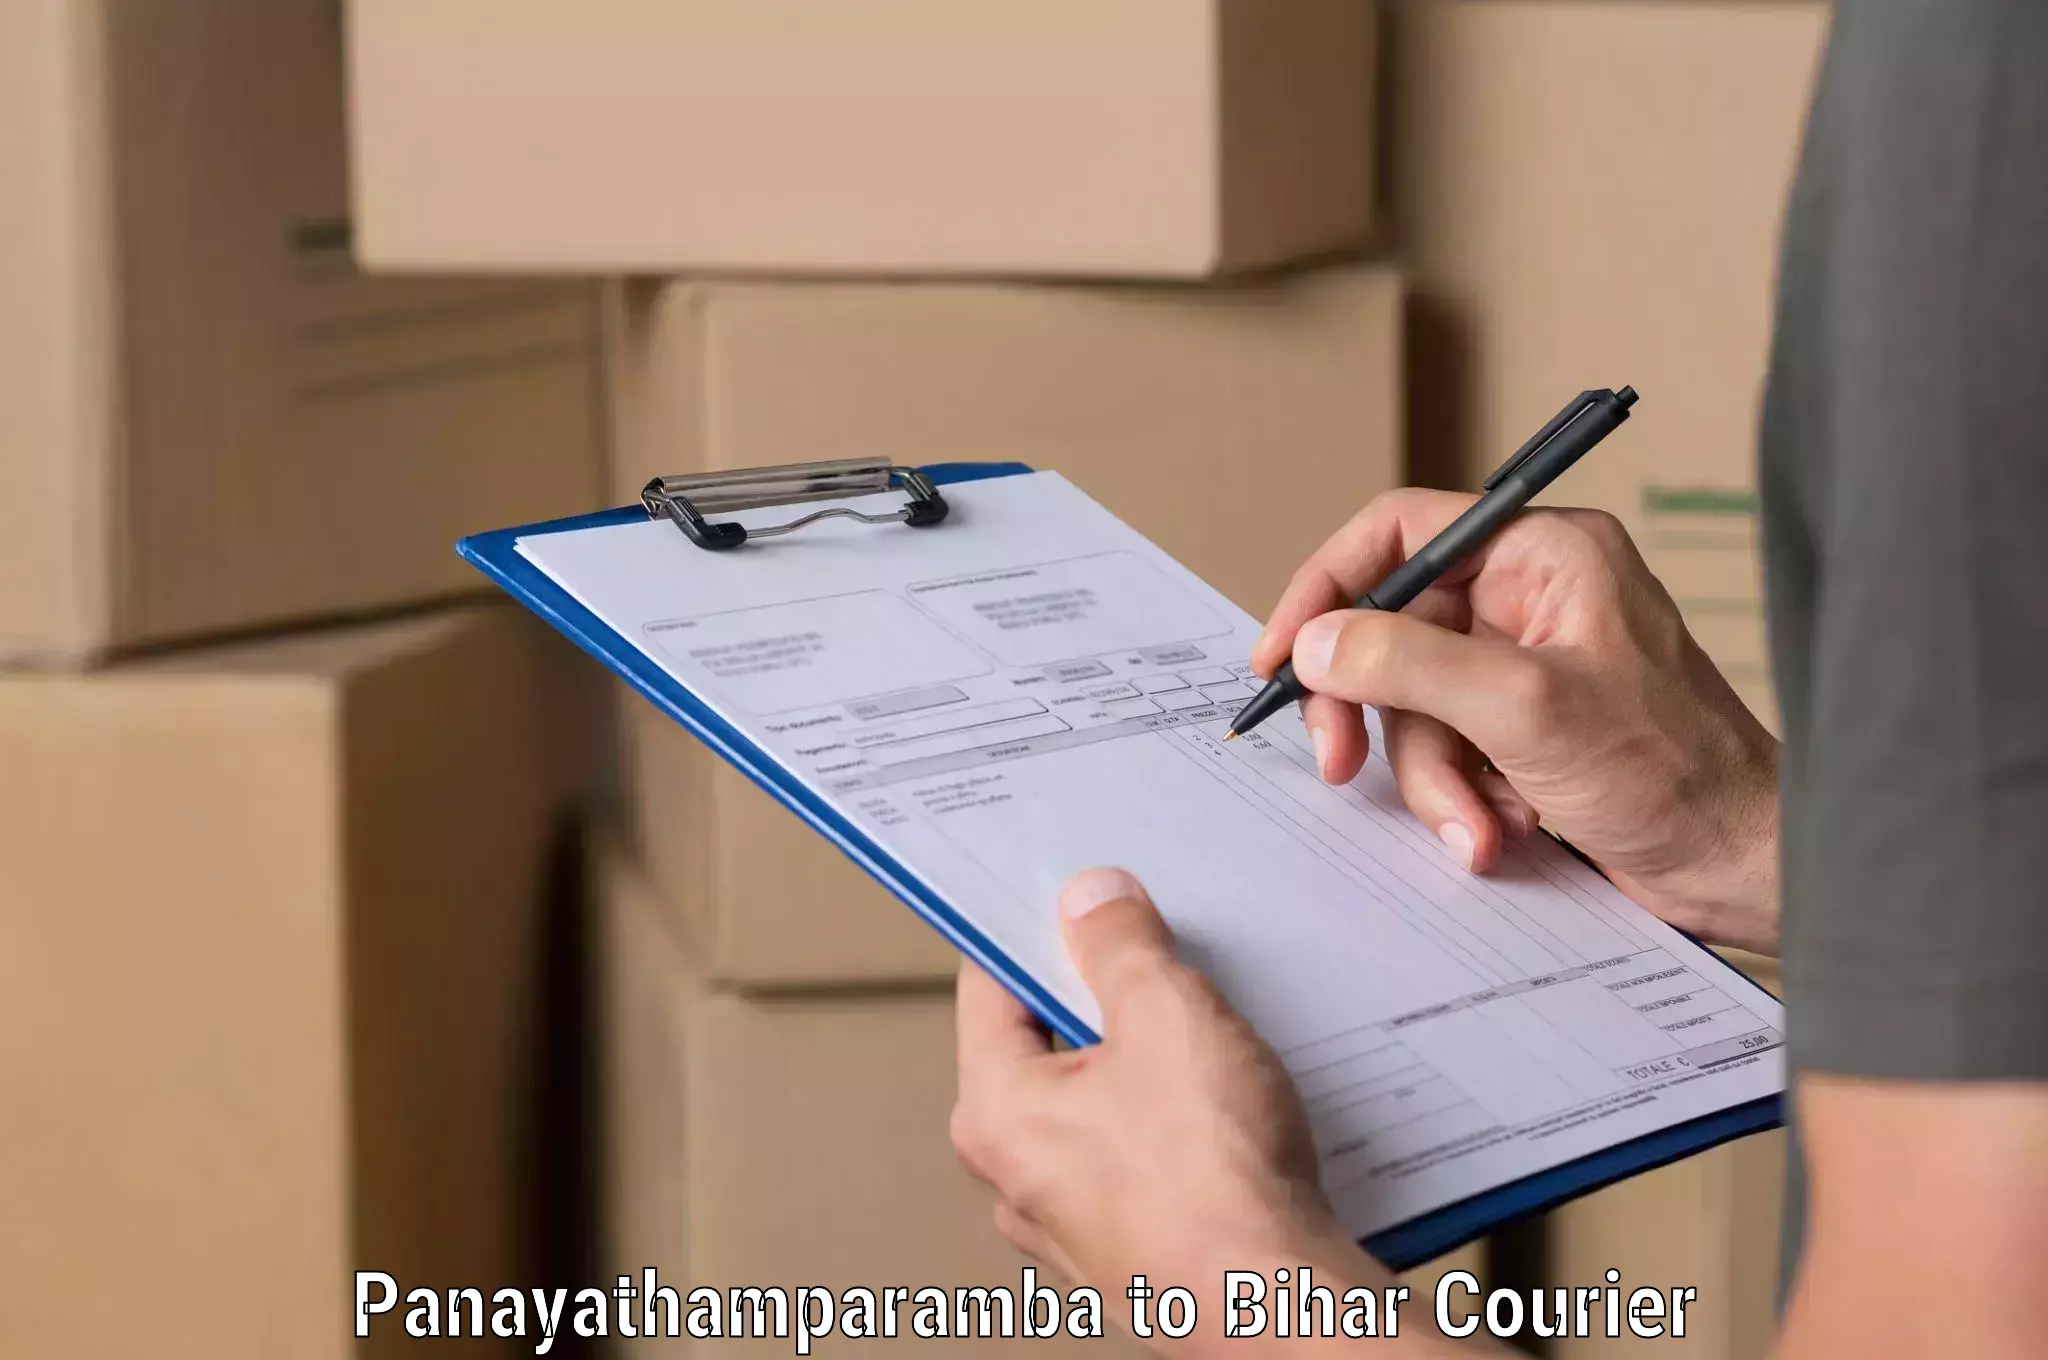 Large-scale shipping solutions in Panayathamparamba to Kamtaul